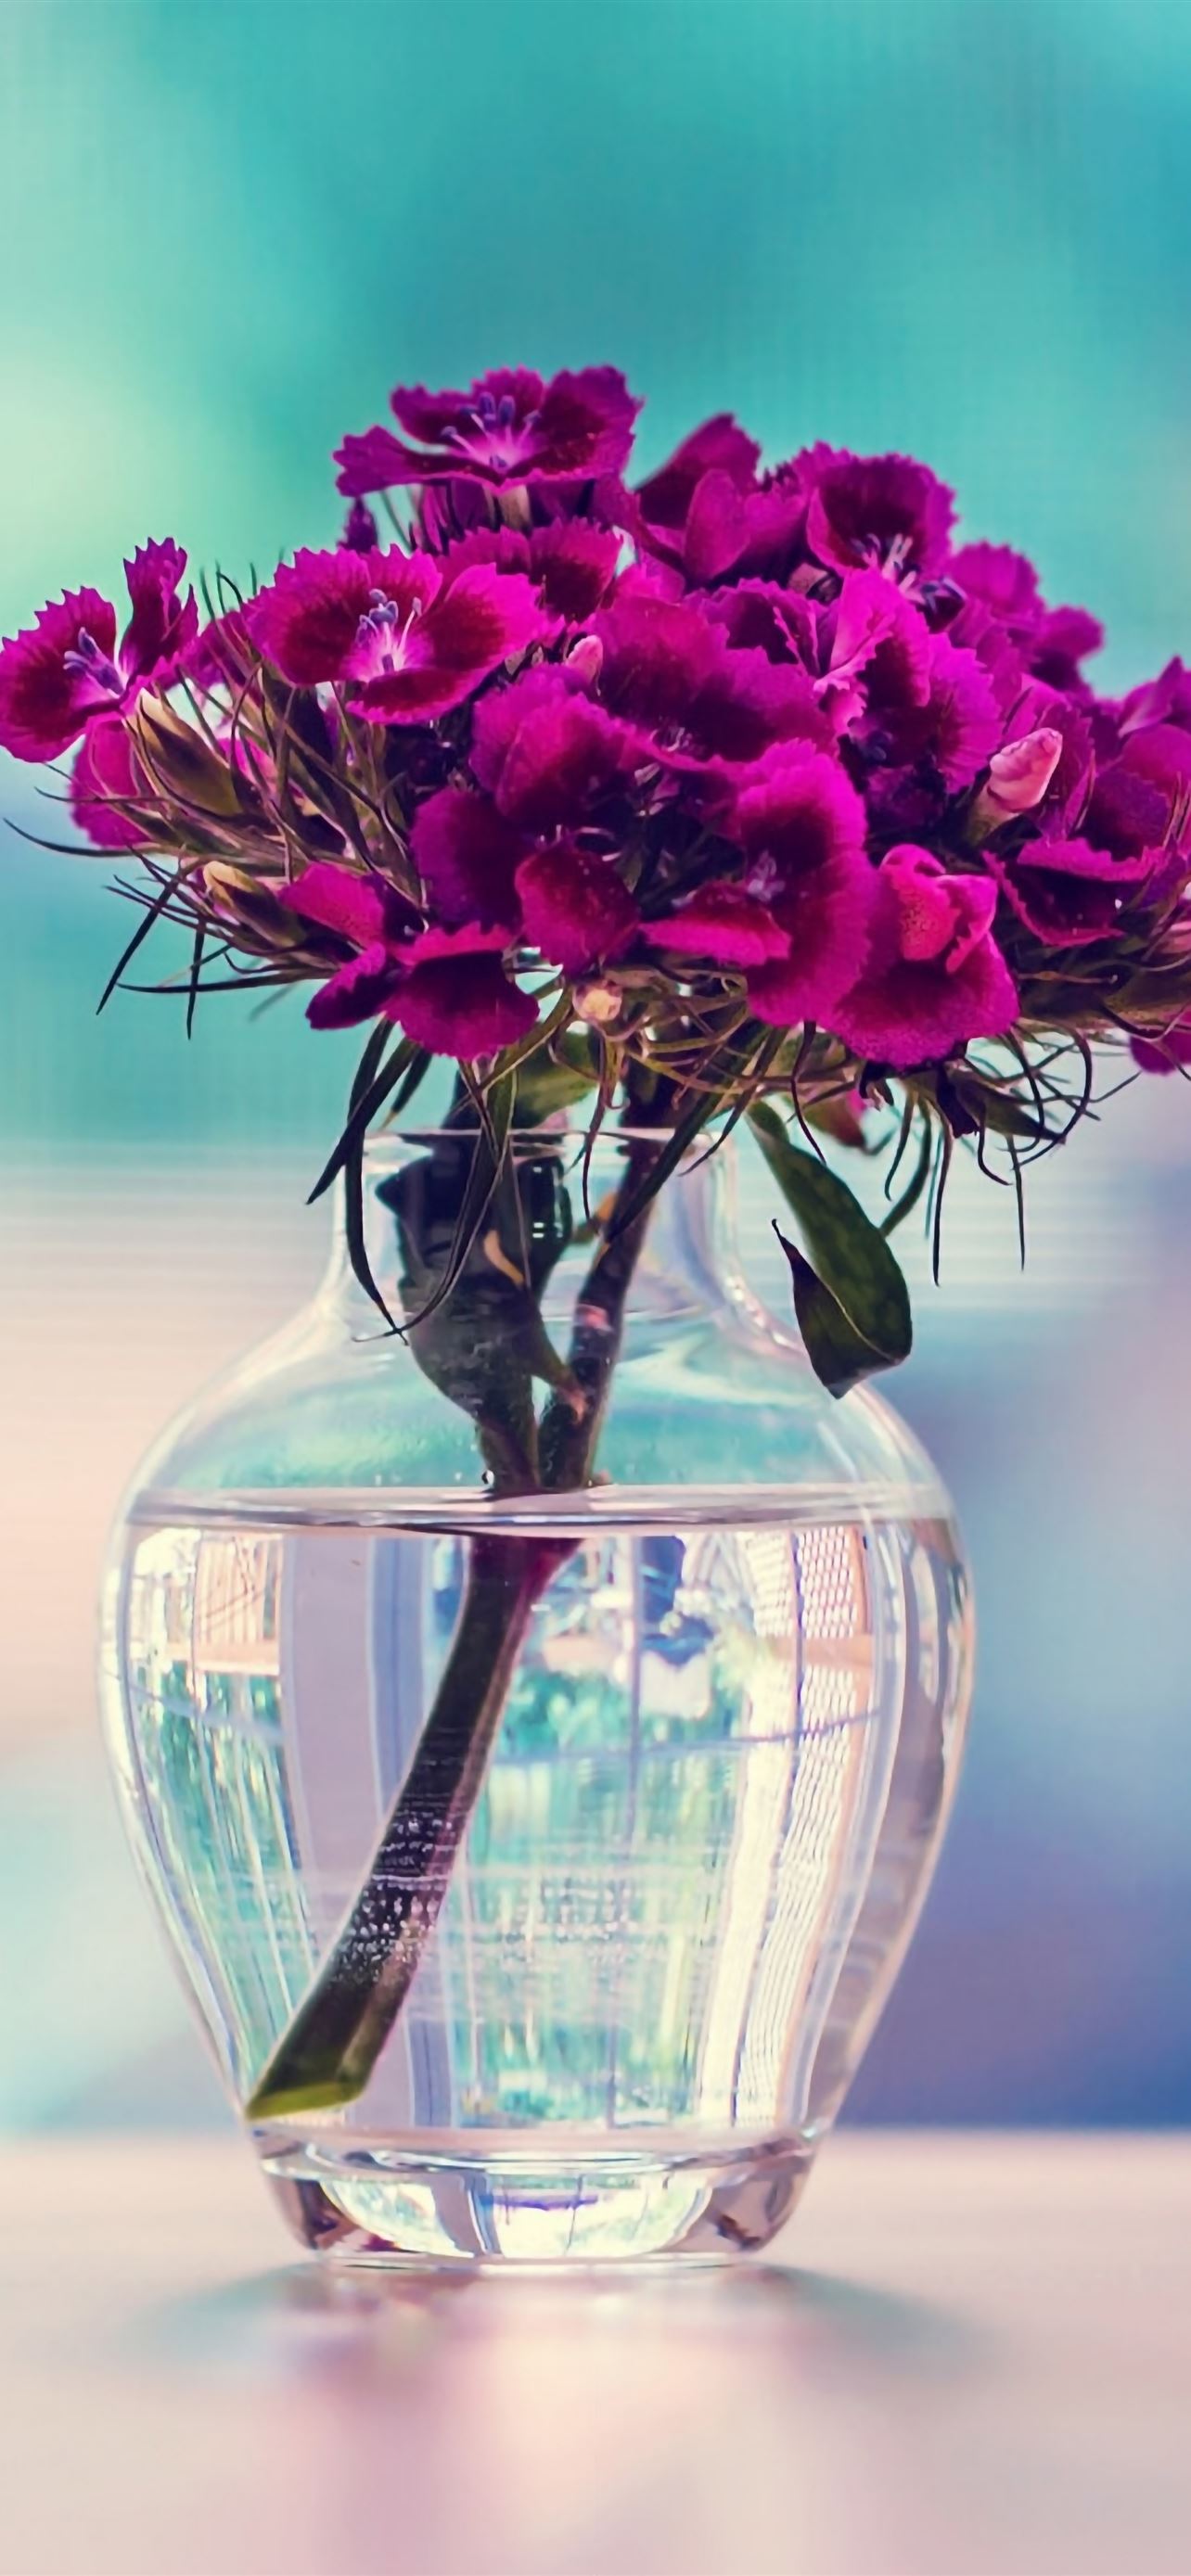 Purple Carnation In A Vase Flower Iphone Wallpapers Free Download